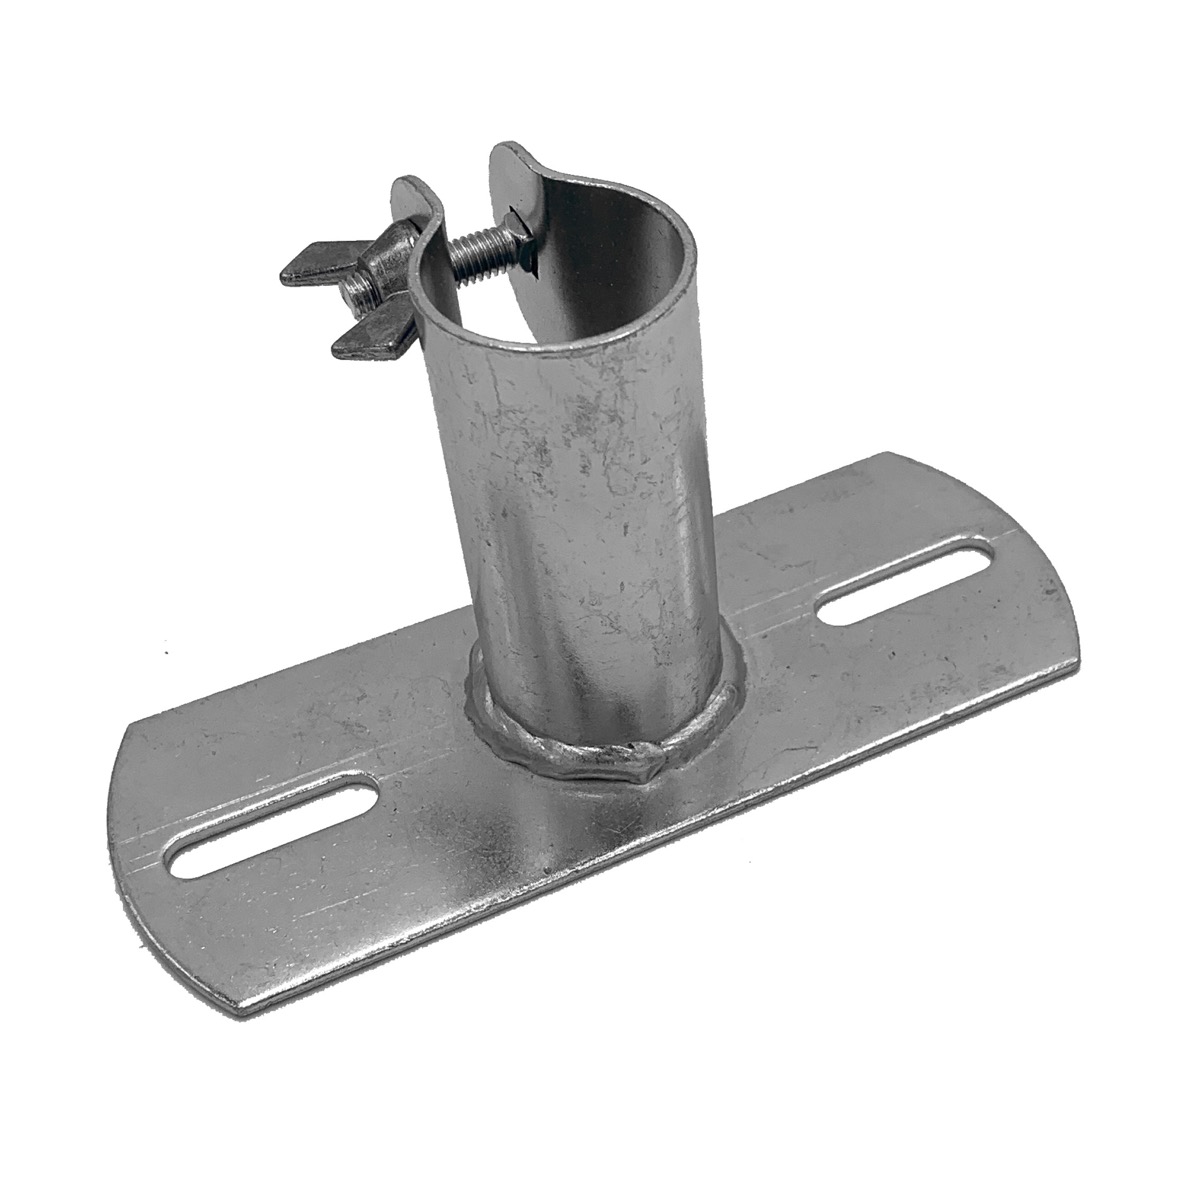 Steel Broom Brackets are very useful for fixing to broom heads. The bracket facilitates a broom handle which can be held in place via a wing-nut screw. This item is popular with Concrete finishing professionals looking to create a brushed finish to the co